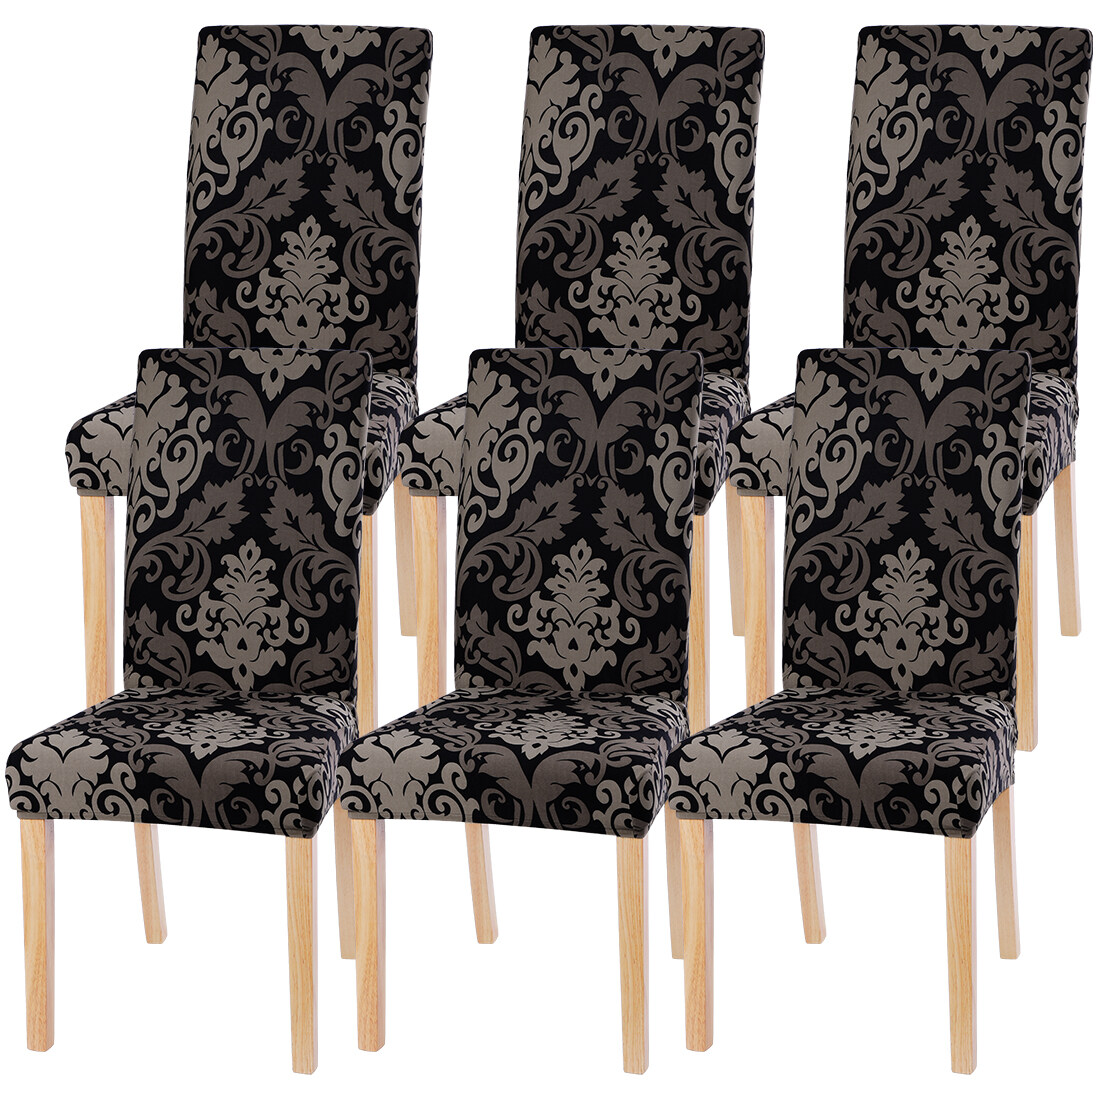 6pcs Elastic Chair Cover Dining Seat, Damask Dining Chair Covers Uk